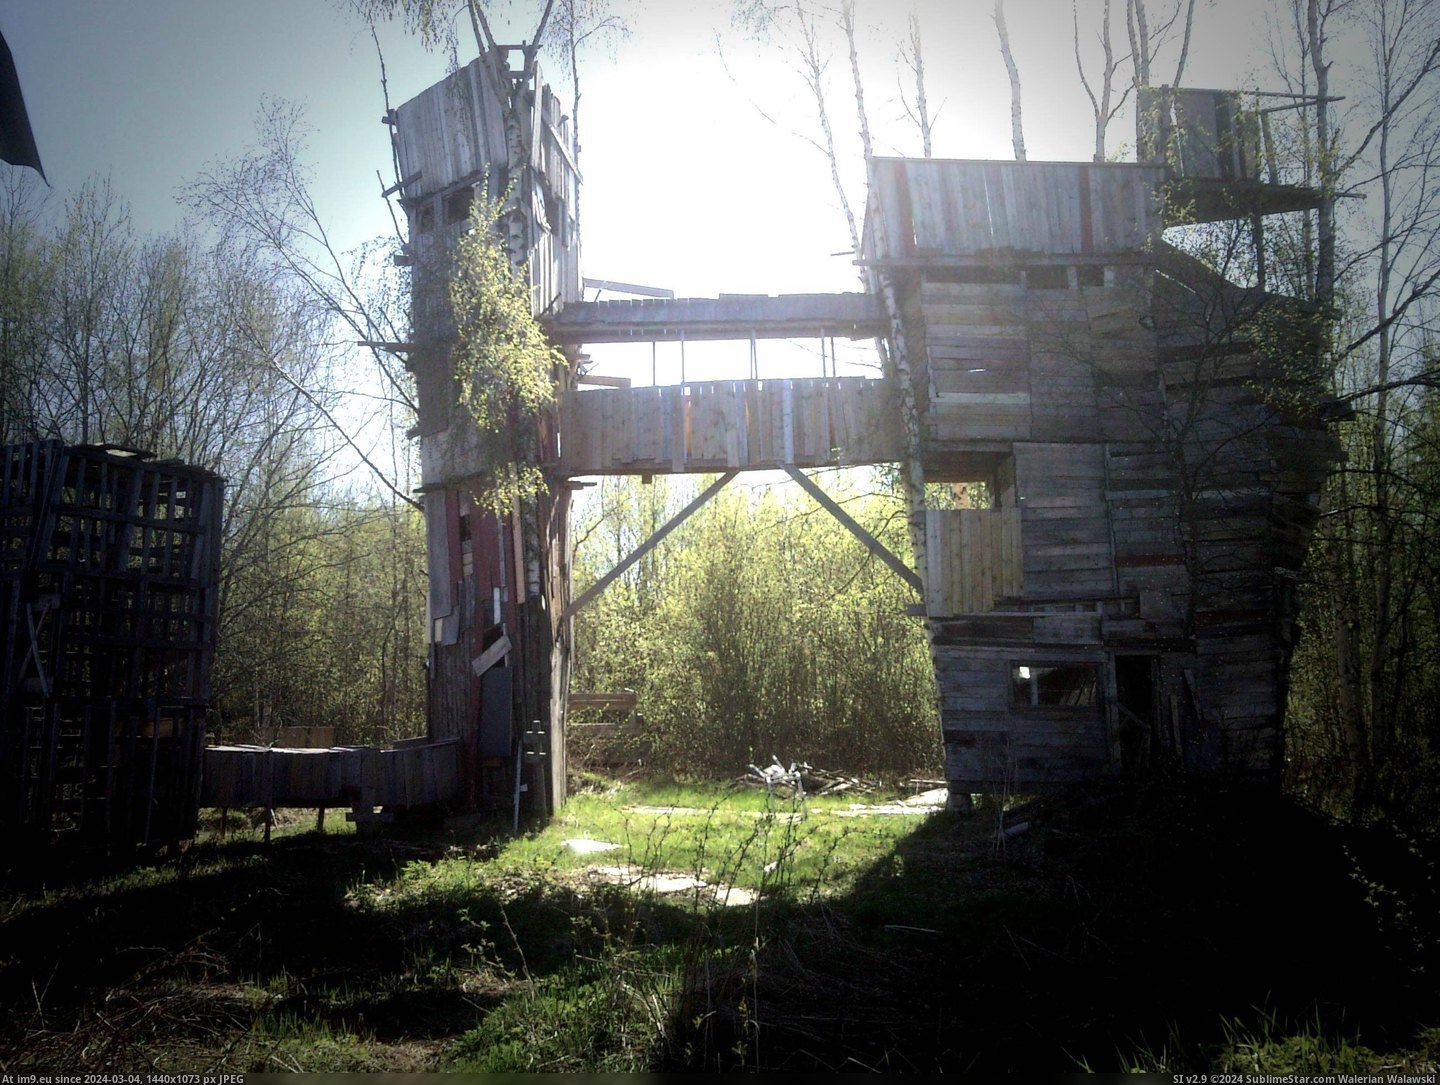 #Work #Hard #Built #Neighbours #Treehouse #Complai #Brothers #Summers #Torn [Pics] Me and my brothers treehouse we built during 5 summers of hard work, it had to be torn down because of neighbours complai Pic. (Изображение из альбом My r/PICS favs))